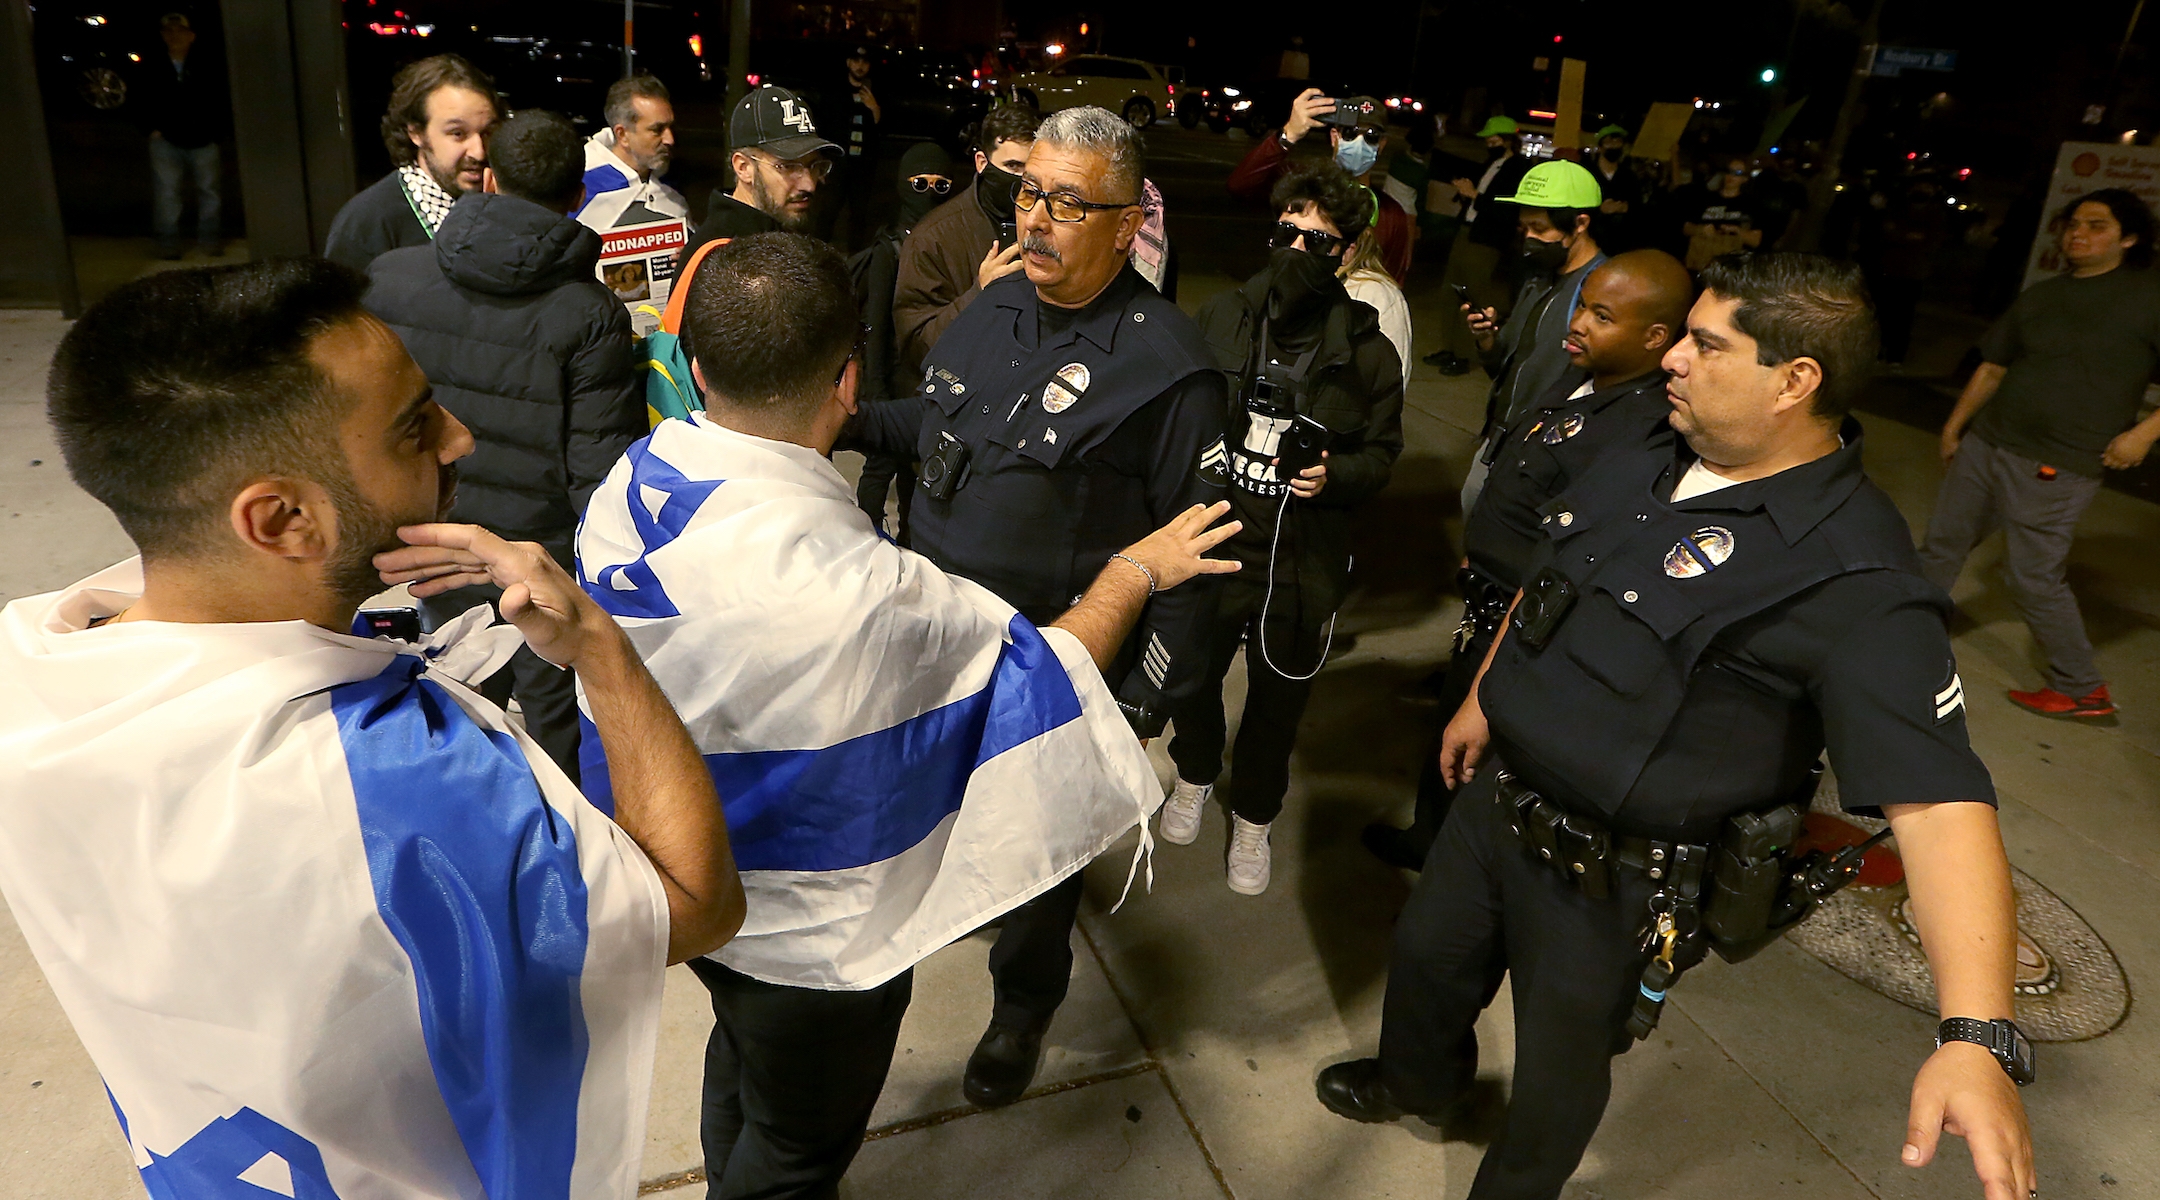 LAPD officers get between pro-Israel and pro-Palestinian activists outside The Museum of Tolerance in Los Angeles on Wednesday, Nov. 8, 2023. The museum held a private screening of footage documenting the Hamas invasion of Israel on Oct. 7th. Supporters of Palestine protested across the street outside. (Luis Sinco / Los Angeles Times via Getty Images)